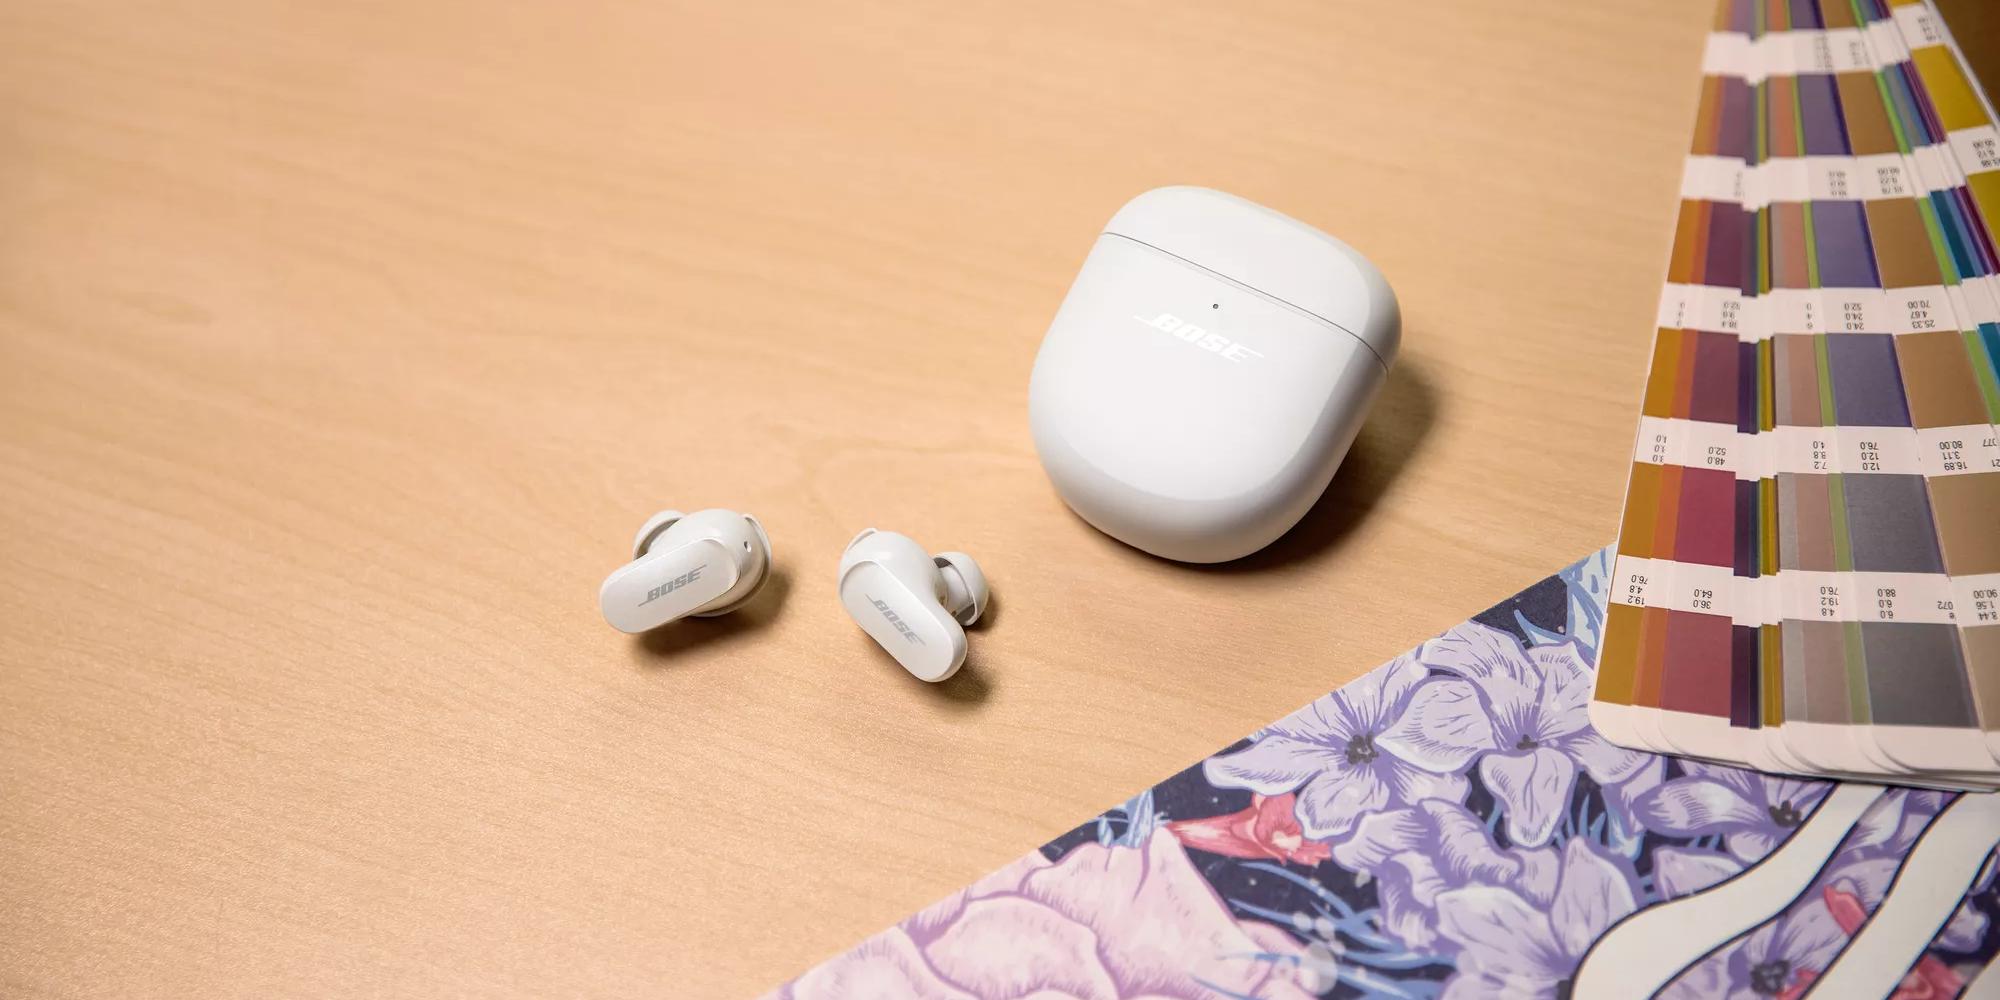 Bose QuietComfort Earbuds II and their charging case on a table